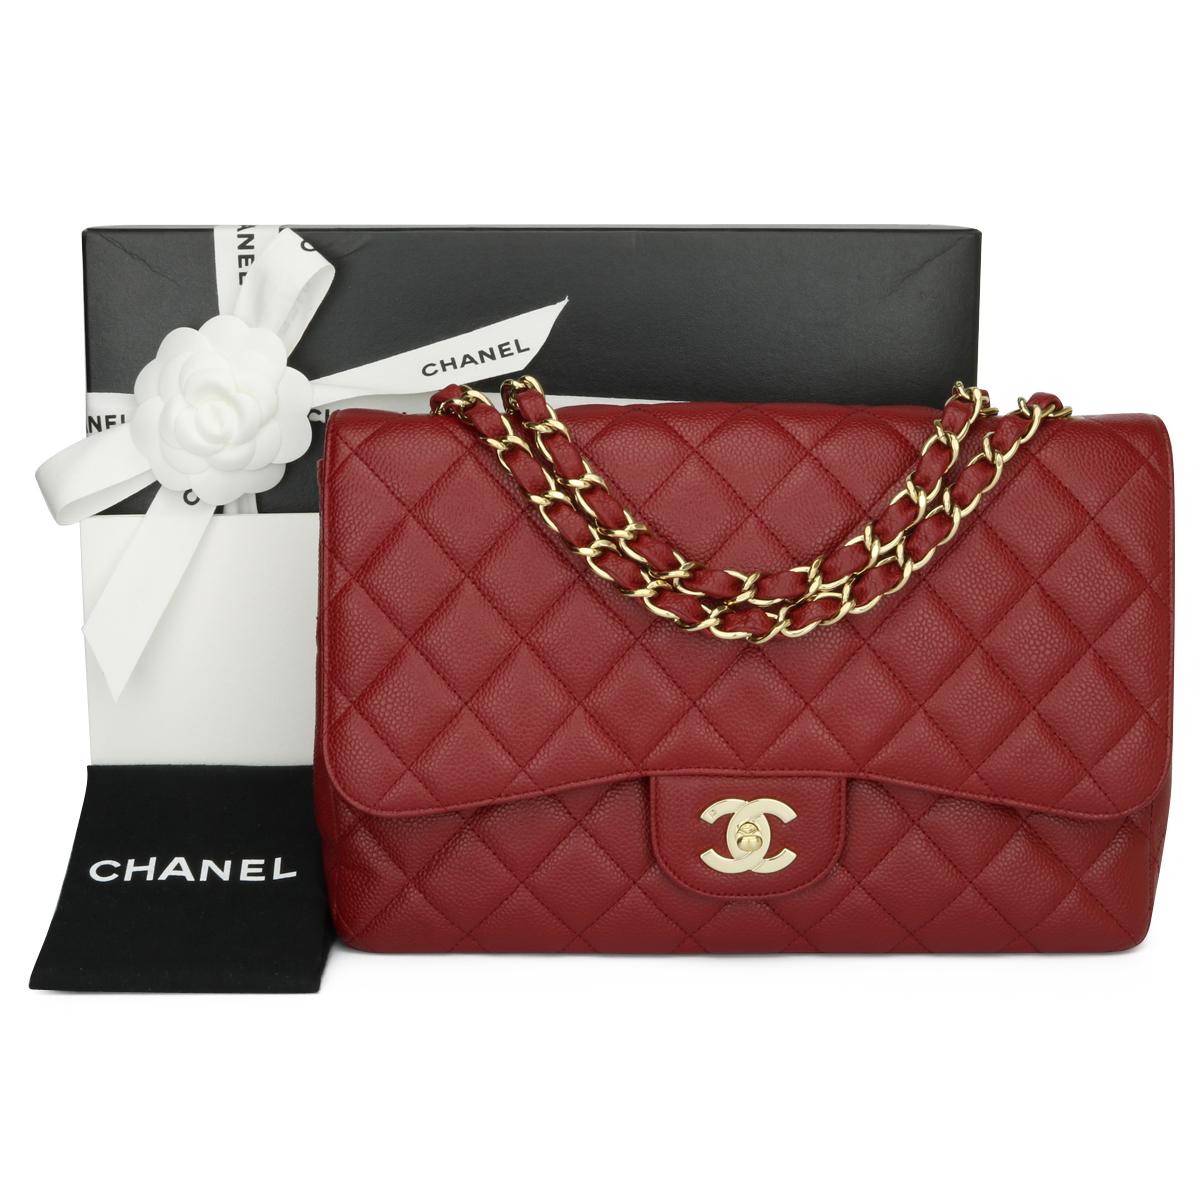 Authentic CHANEL Classic Jumbo Single Flap Bag Dark Red Caviar with Gold Hardware 2009 Super Rare!

This stunning bag is in excellent condition, the bag still holds its original shape and the hardware is still very shiny.

Exterior Condition: Mint